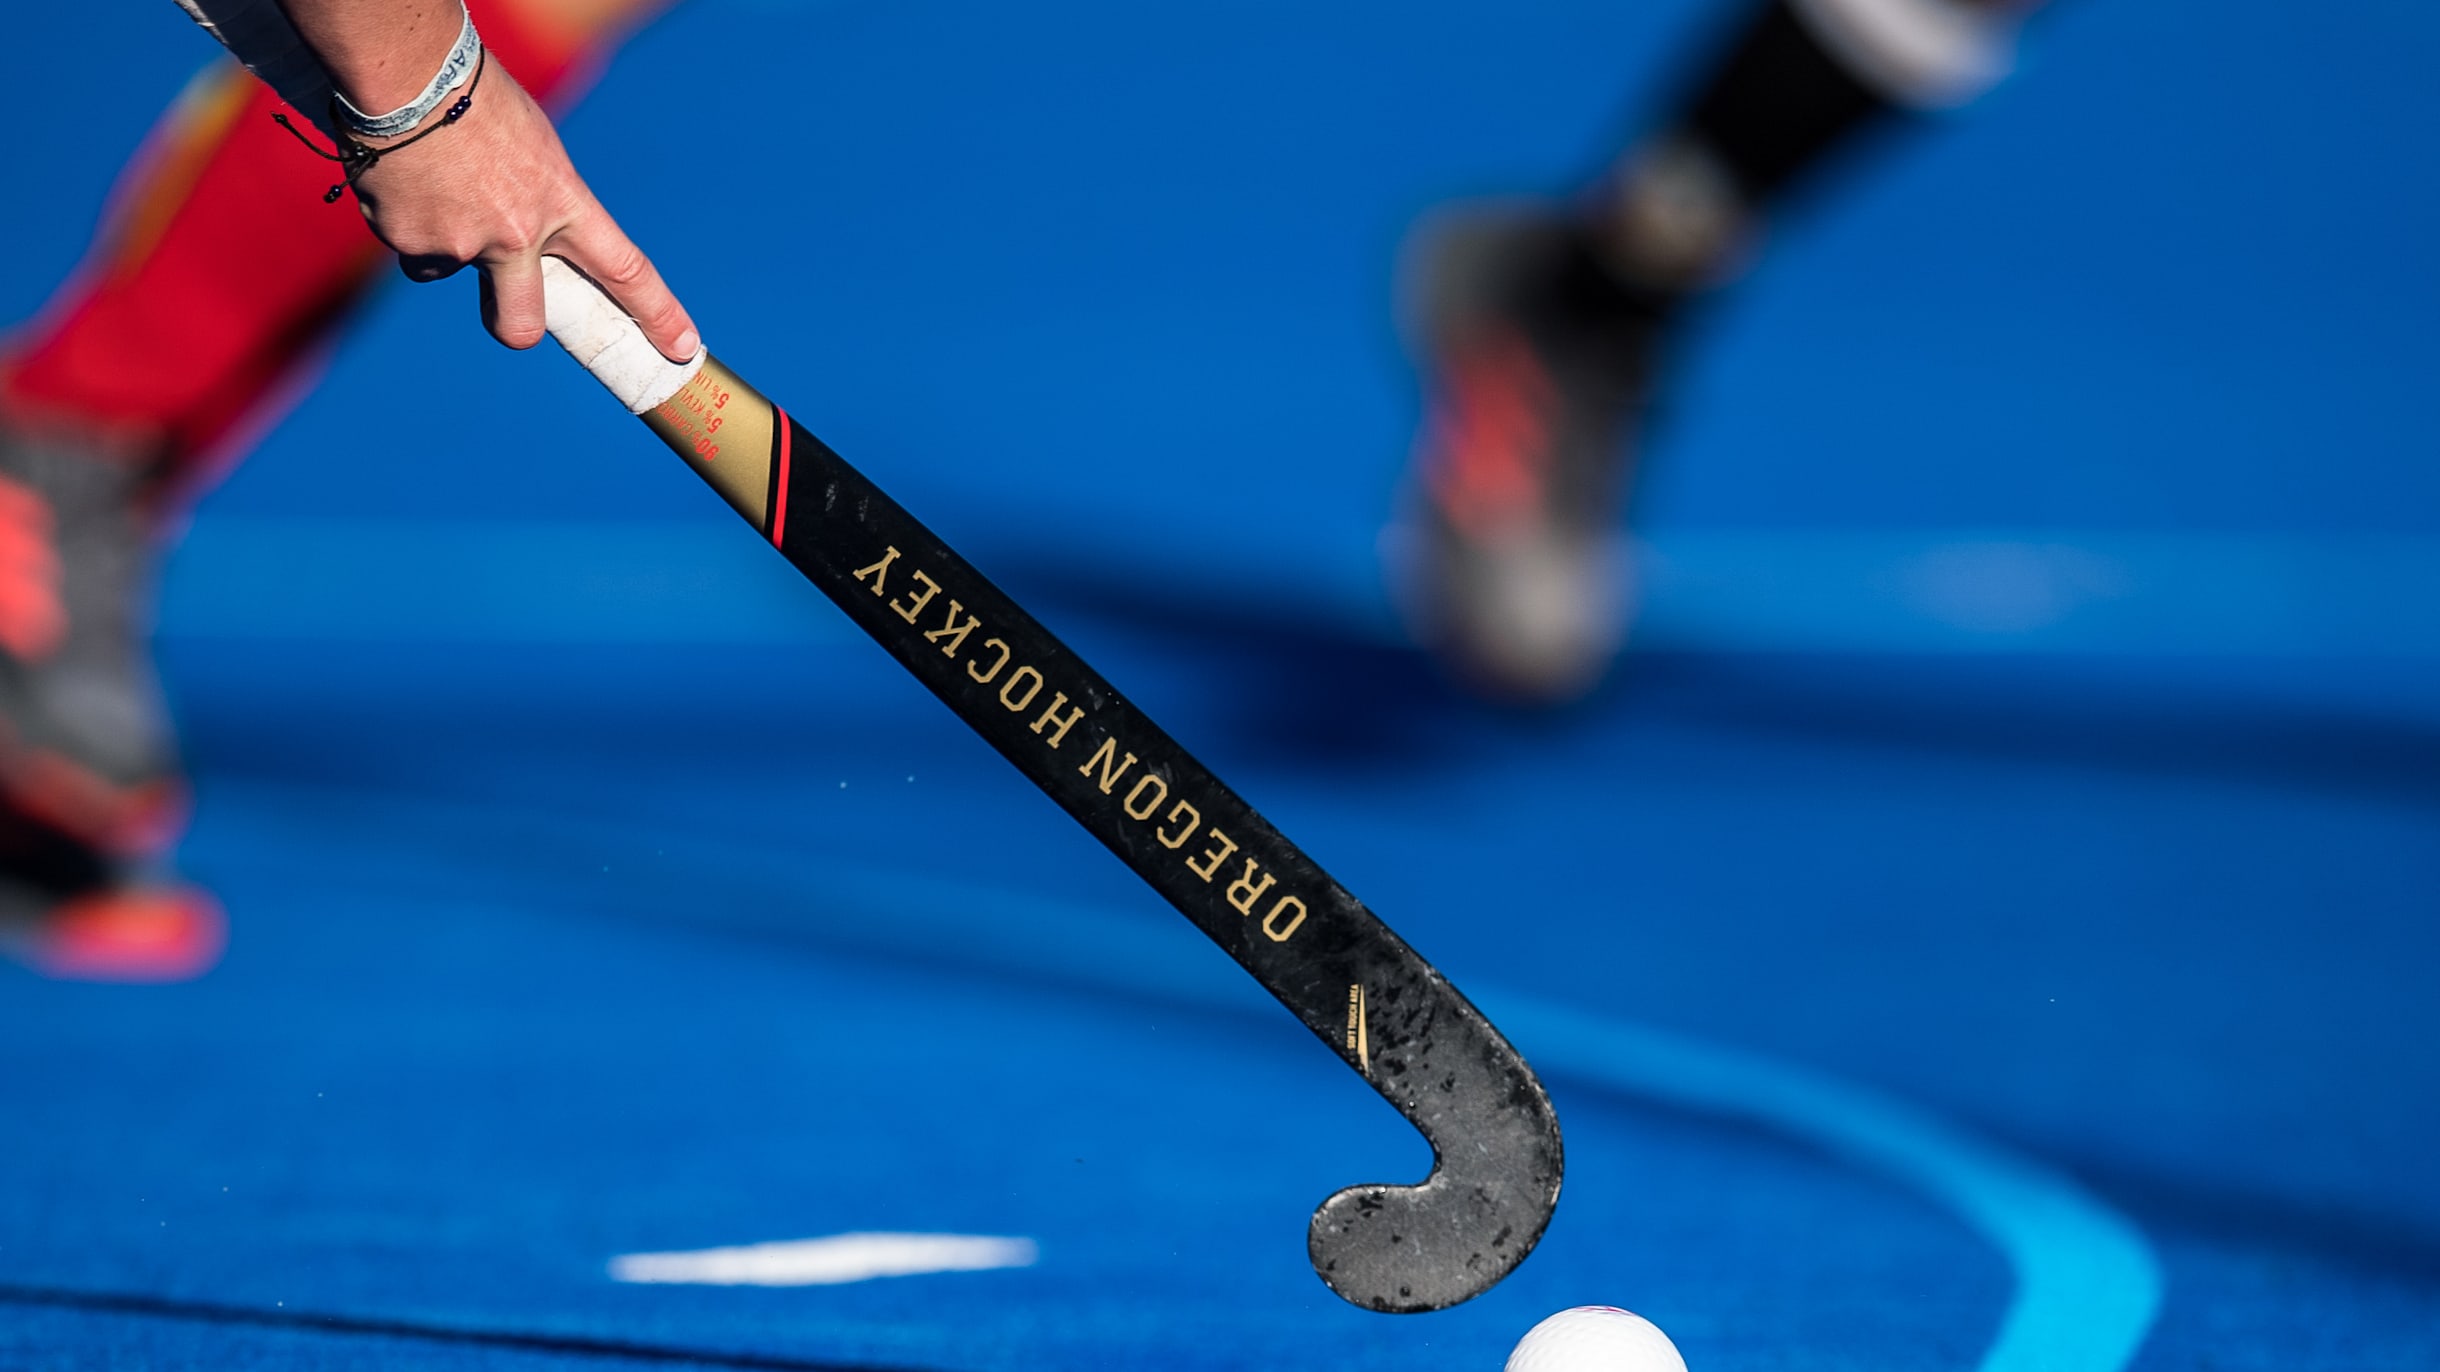 Field Hockey Clothing: Components, Specifications & How it's Made